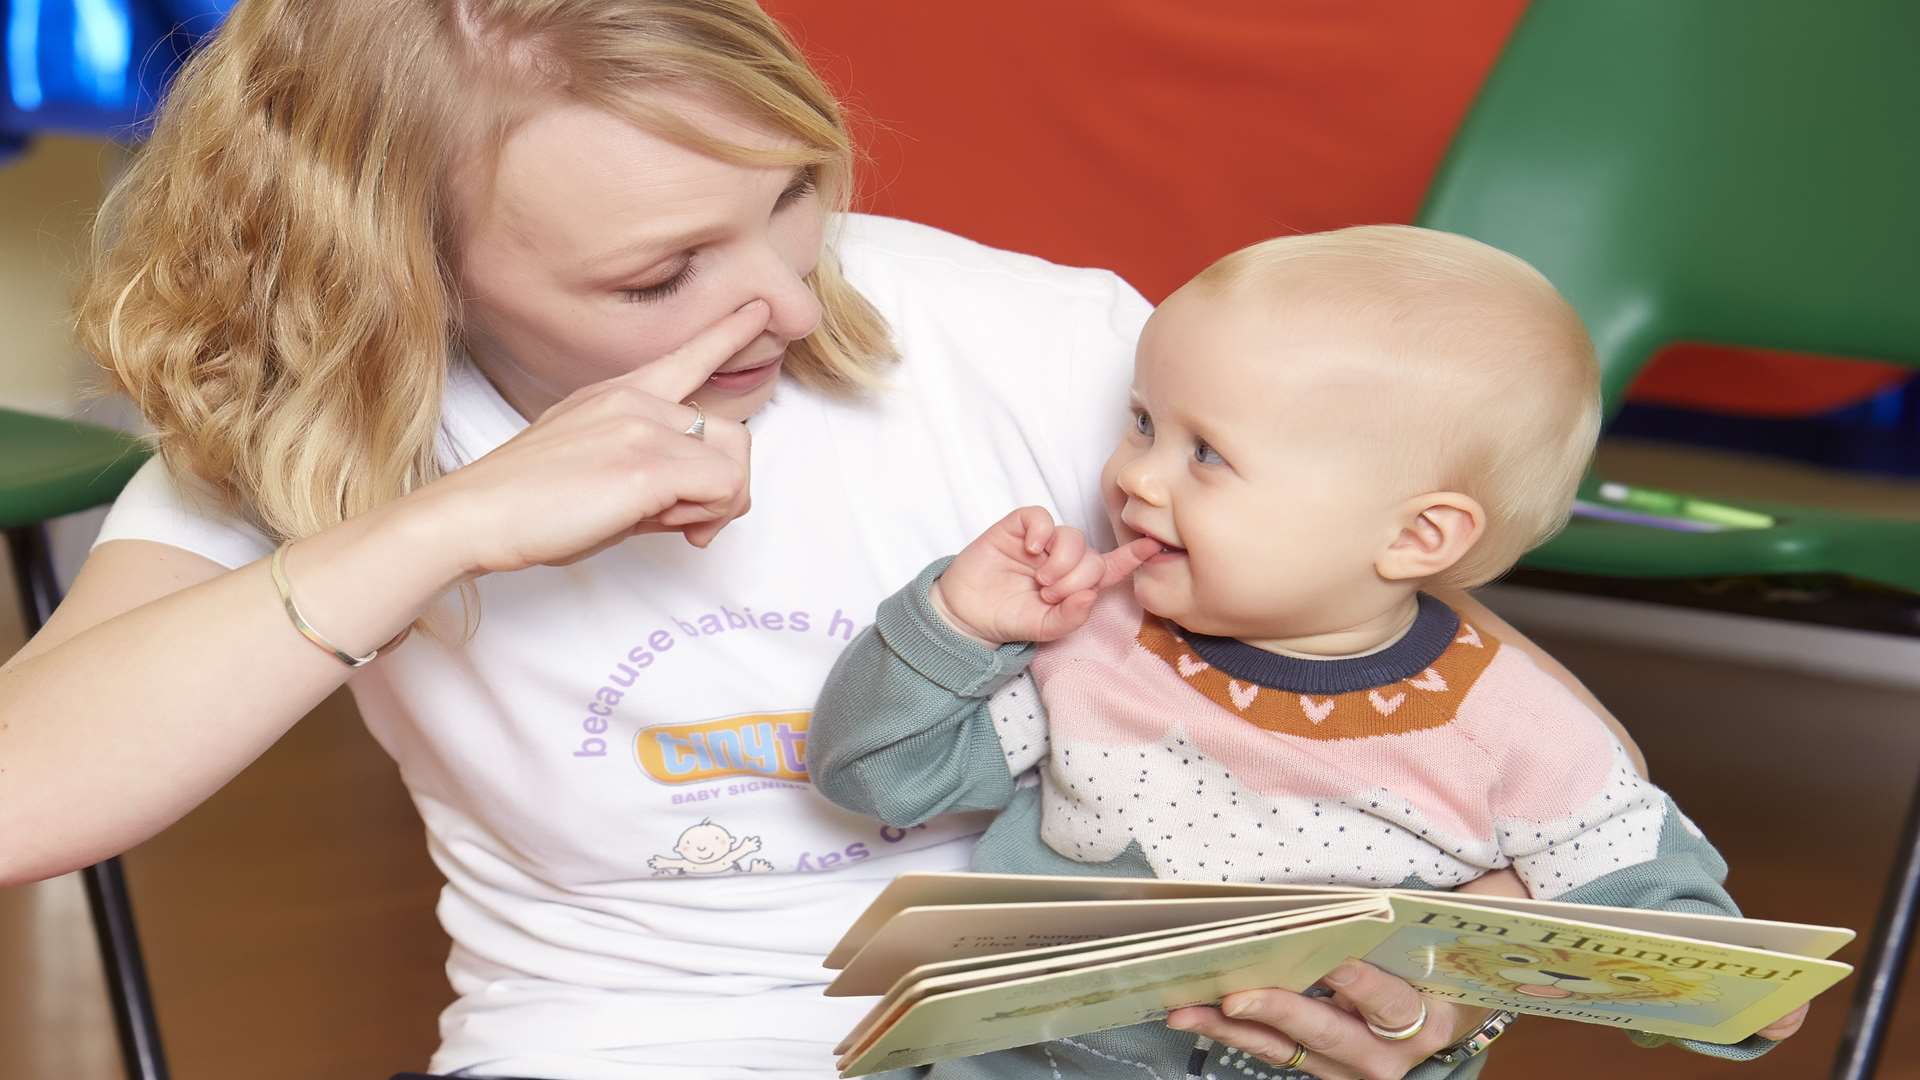 Mum Rebecca Oakley teaches baby sign language through Tiny Talk. Picture: npower